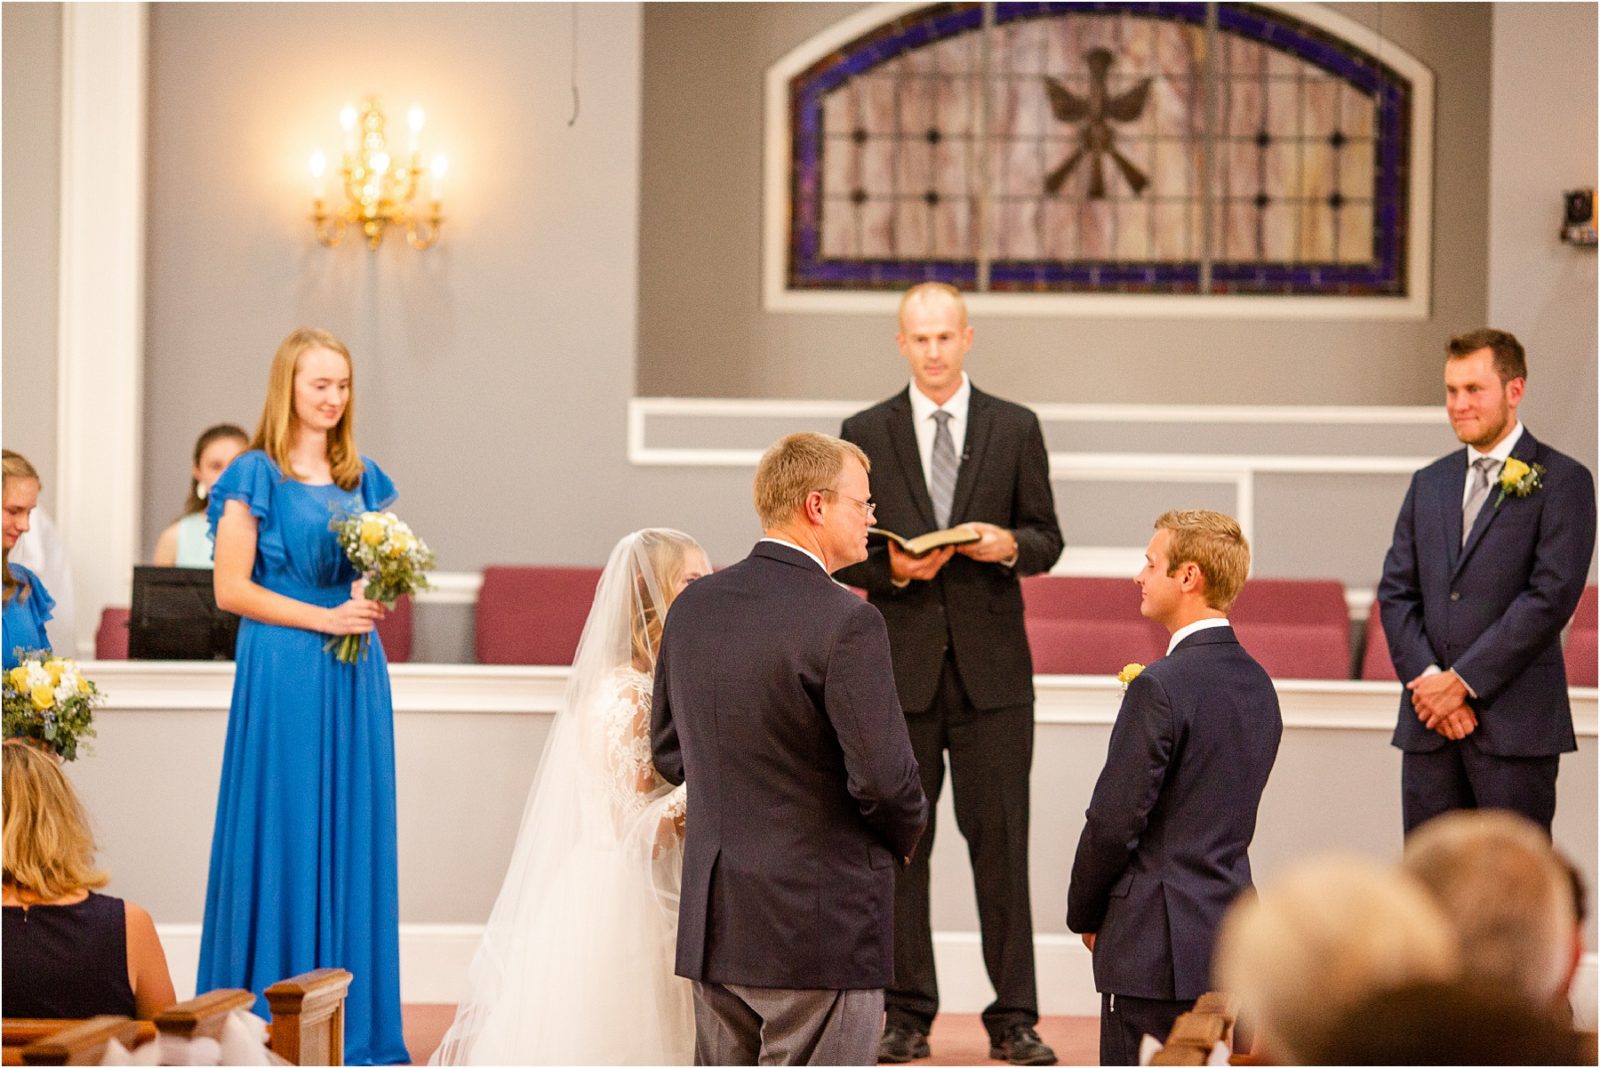 Father of bride giving away daughter to groom